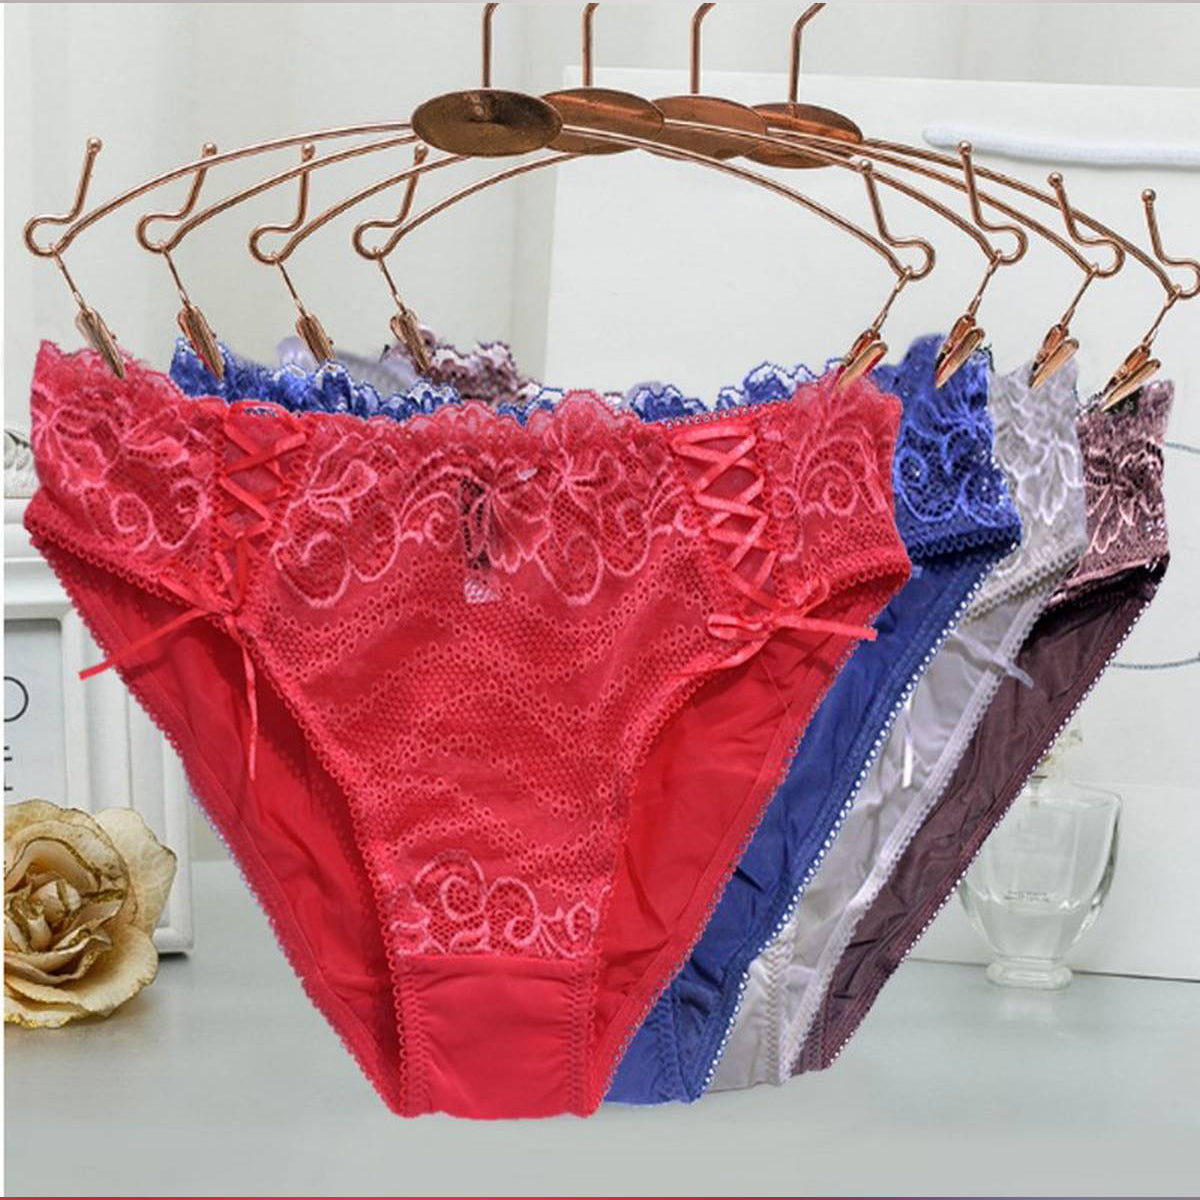 Pack Of 3 - Lace Hollow Out Crotch Cotton Briefs Panties